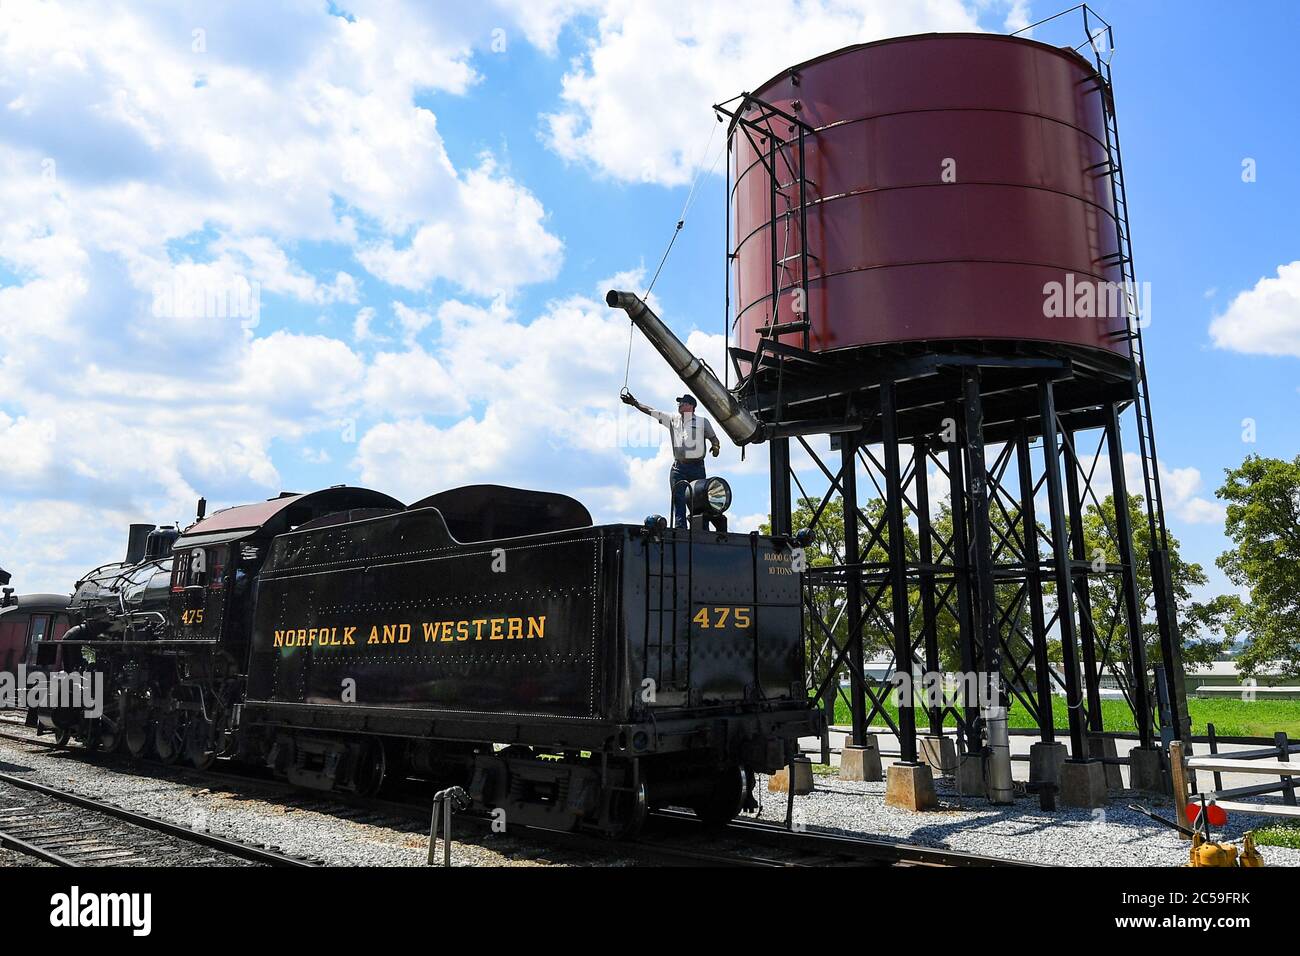 June 29, 2020: The Strasburg Railroad, Norfolk & Western, 475 steam locomotive fireman prepares to fill the water tank following the last excursion of the day on Monday, June, 29, 2020, in Ronks, Pennsylvania. The Strasburg Railroad re-opened for passenger service on Friday, June, 26th, after being closed due to the COVID-19 pandemic. Additional health related safety measures have been put in place for the re-opening. Rich Barnes/CSM Stock Photo